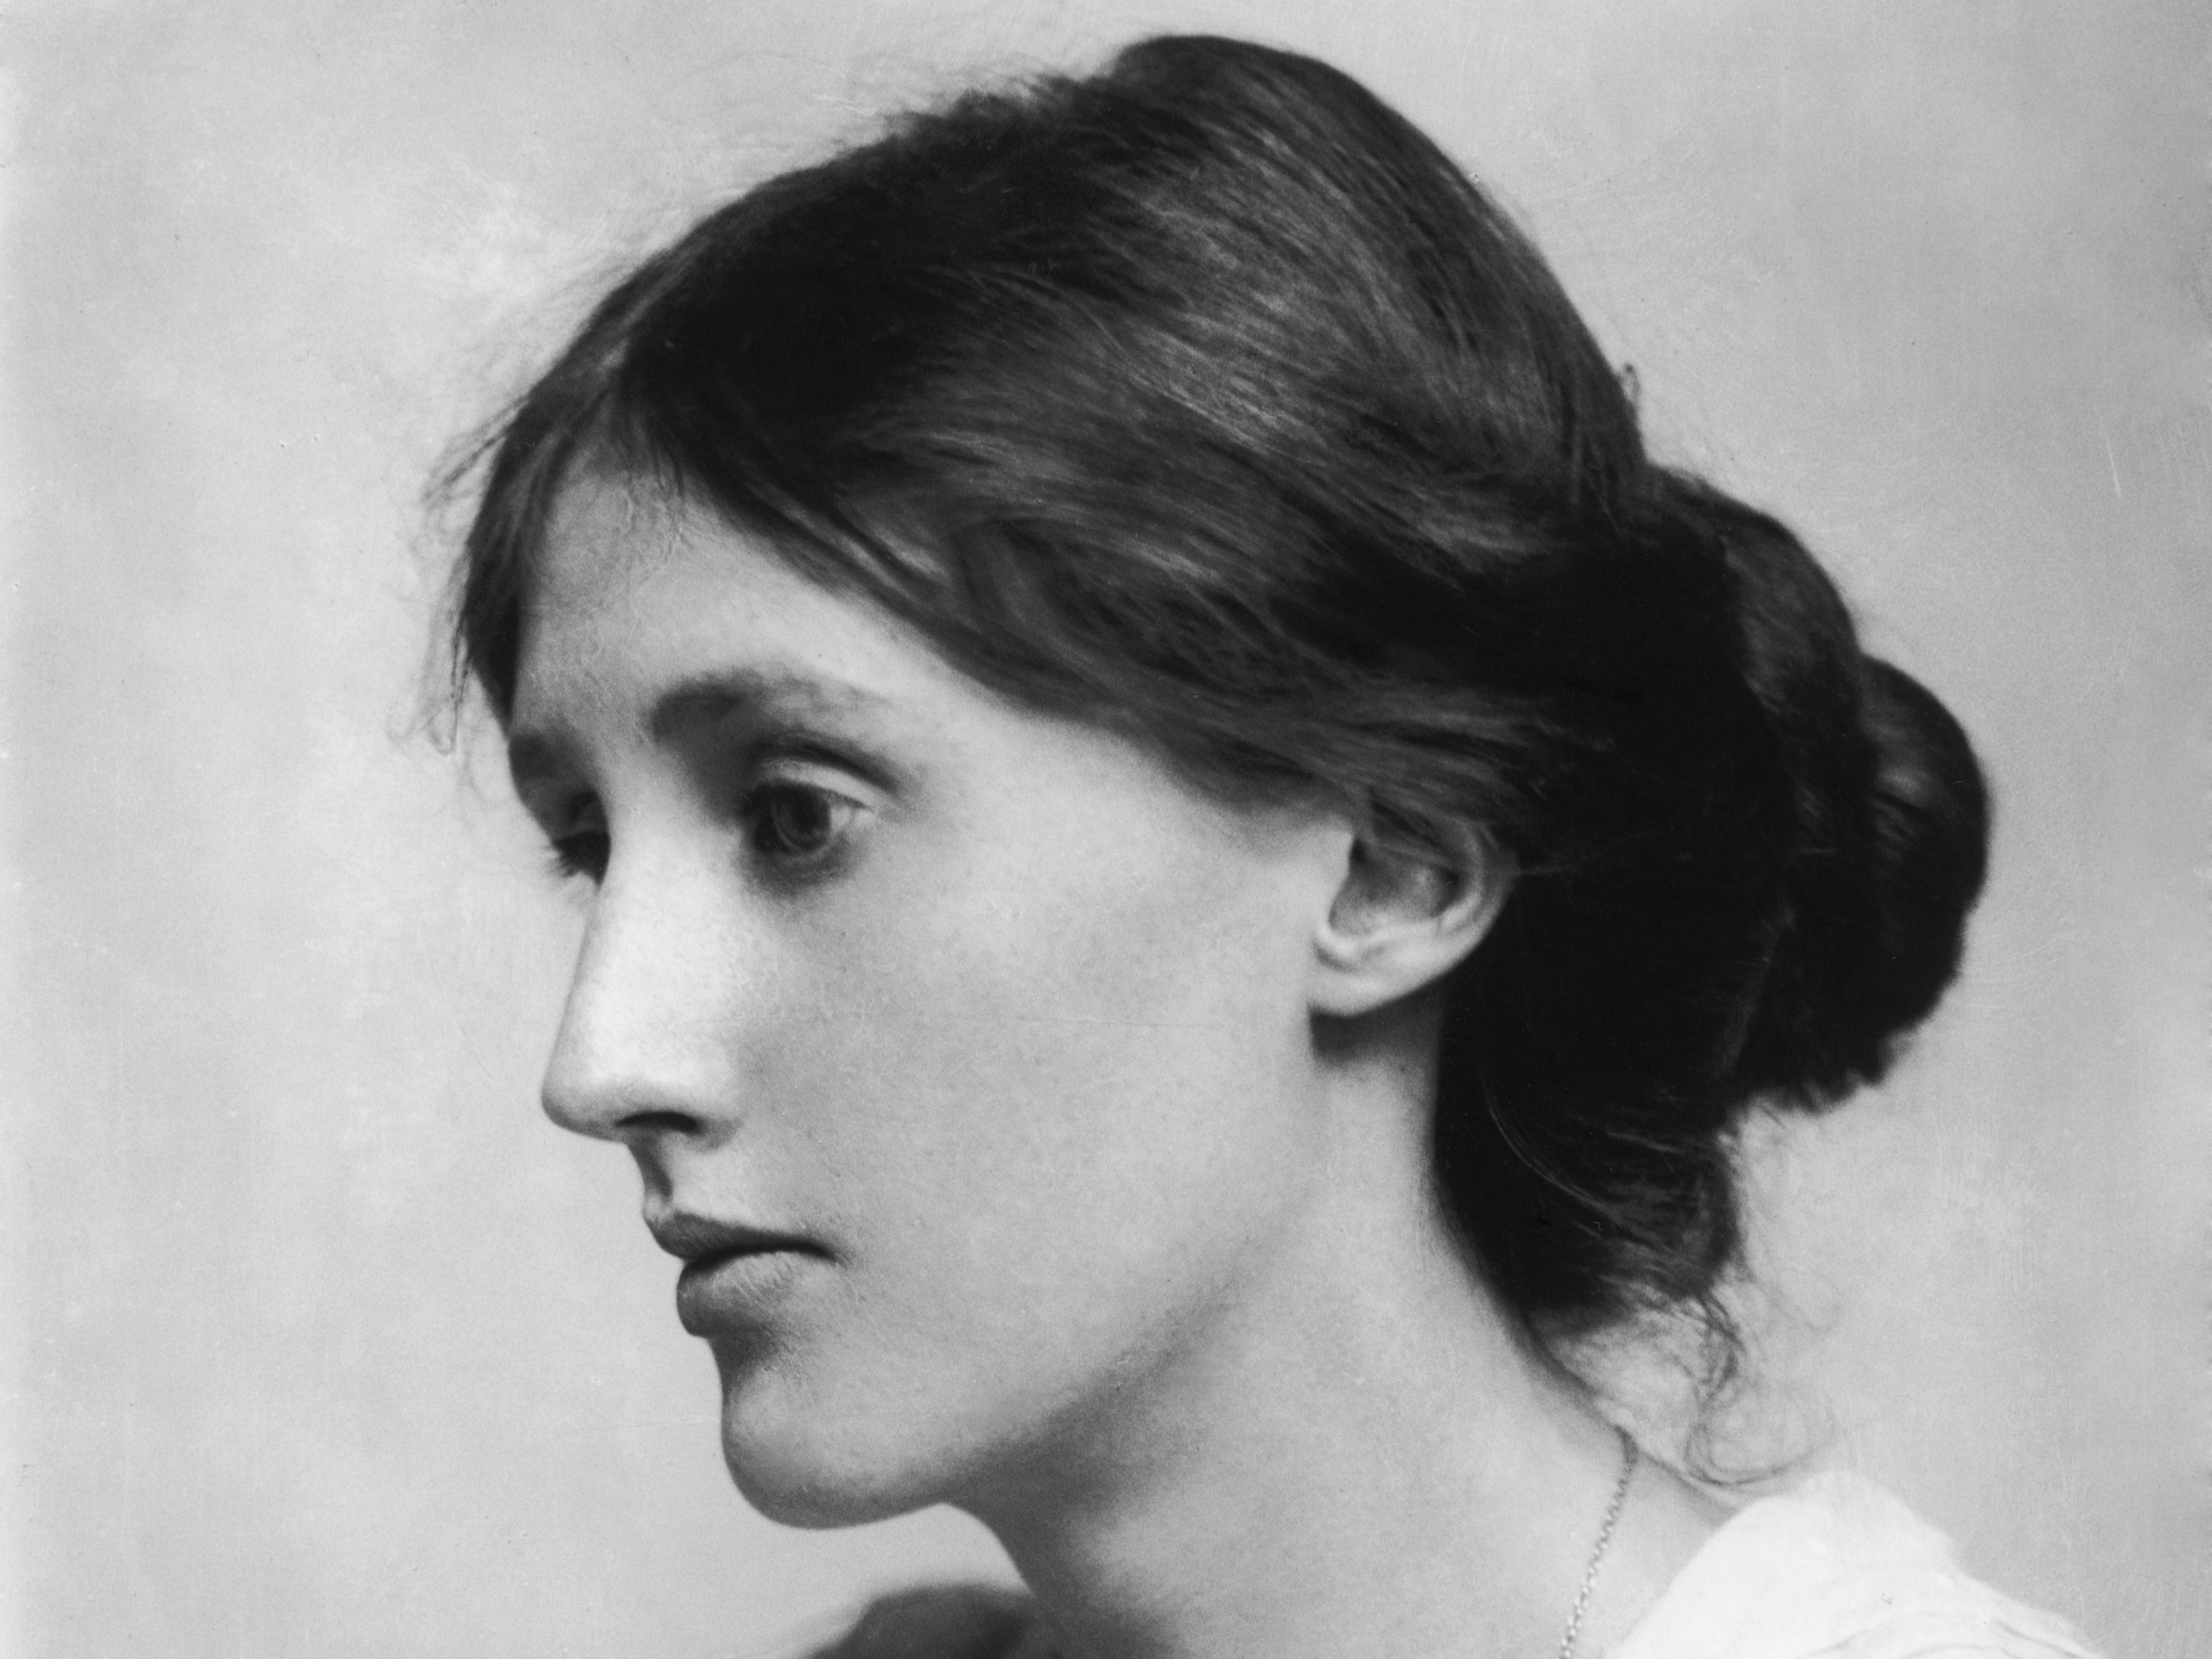 The entries in Woolf’s diary span over 25 years